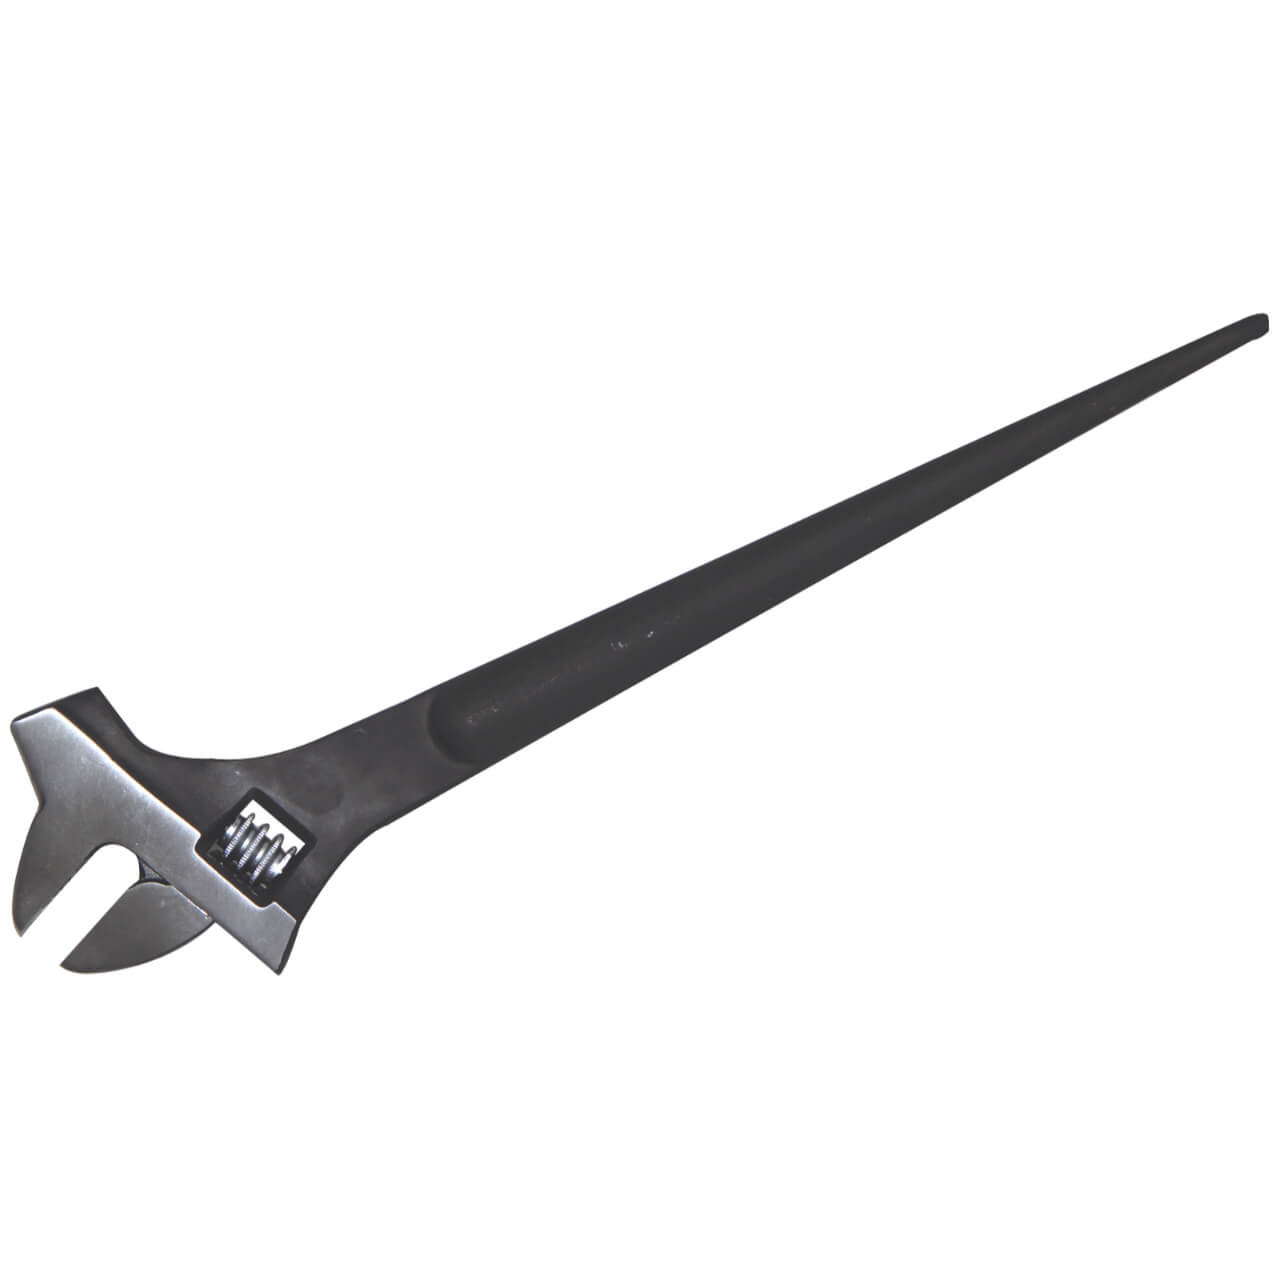 SP Tools 400mm Adjustable Construction Wrench